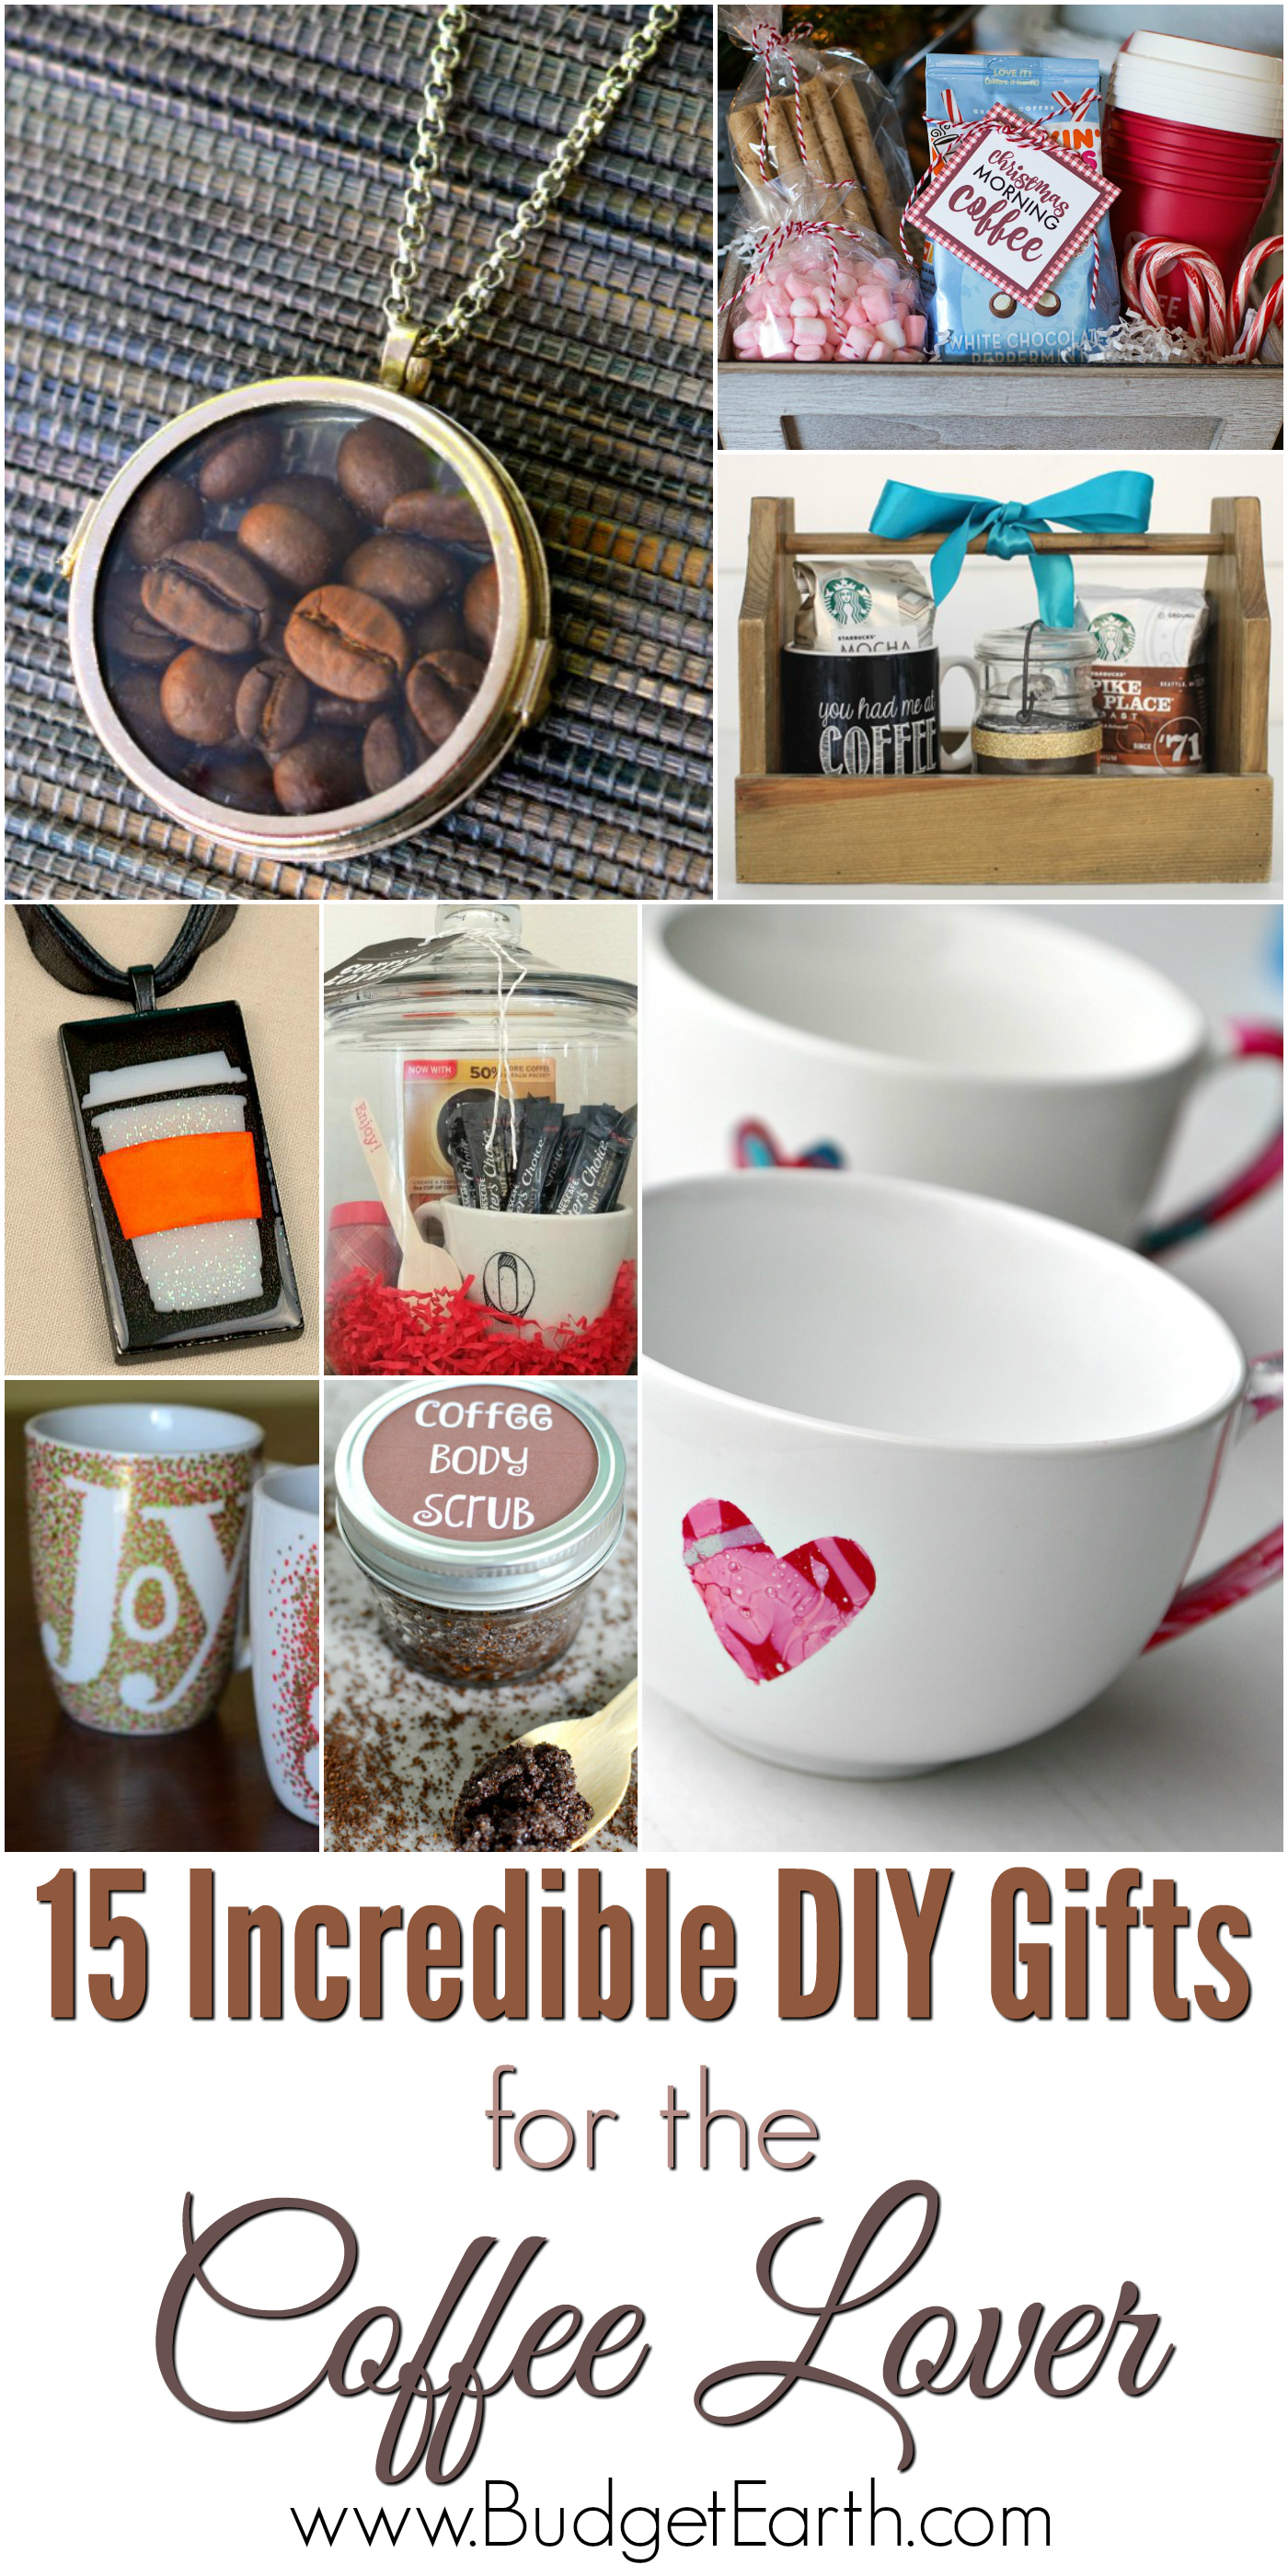 https://www.budgetearth.com/wp-content/uploads/2016/12/15-Incredible-DIY-Gifts-for-the-Coffee-Lover.jpg